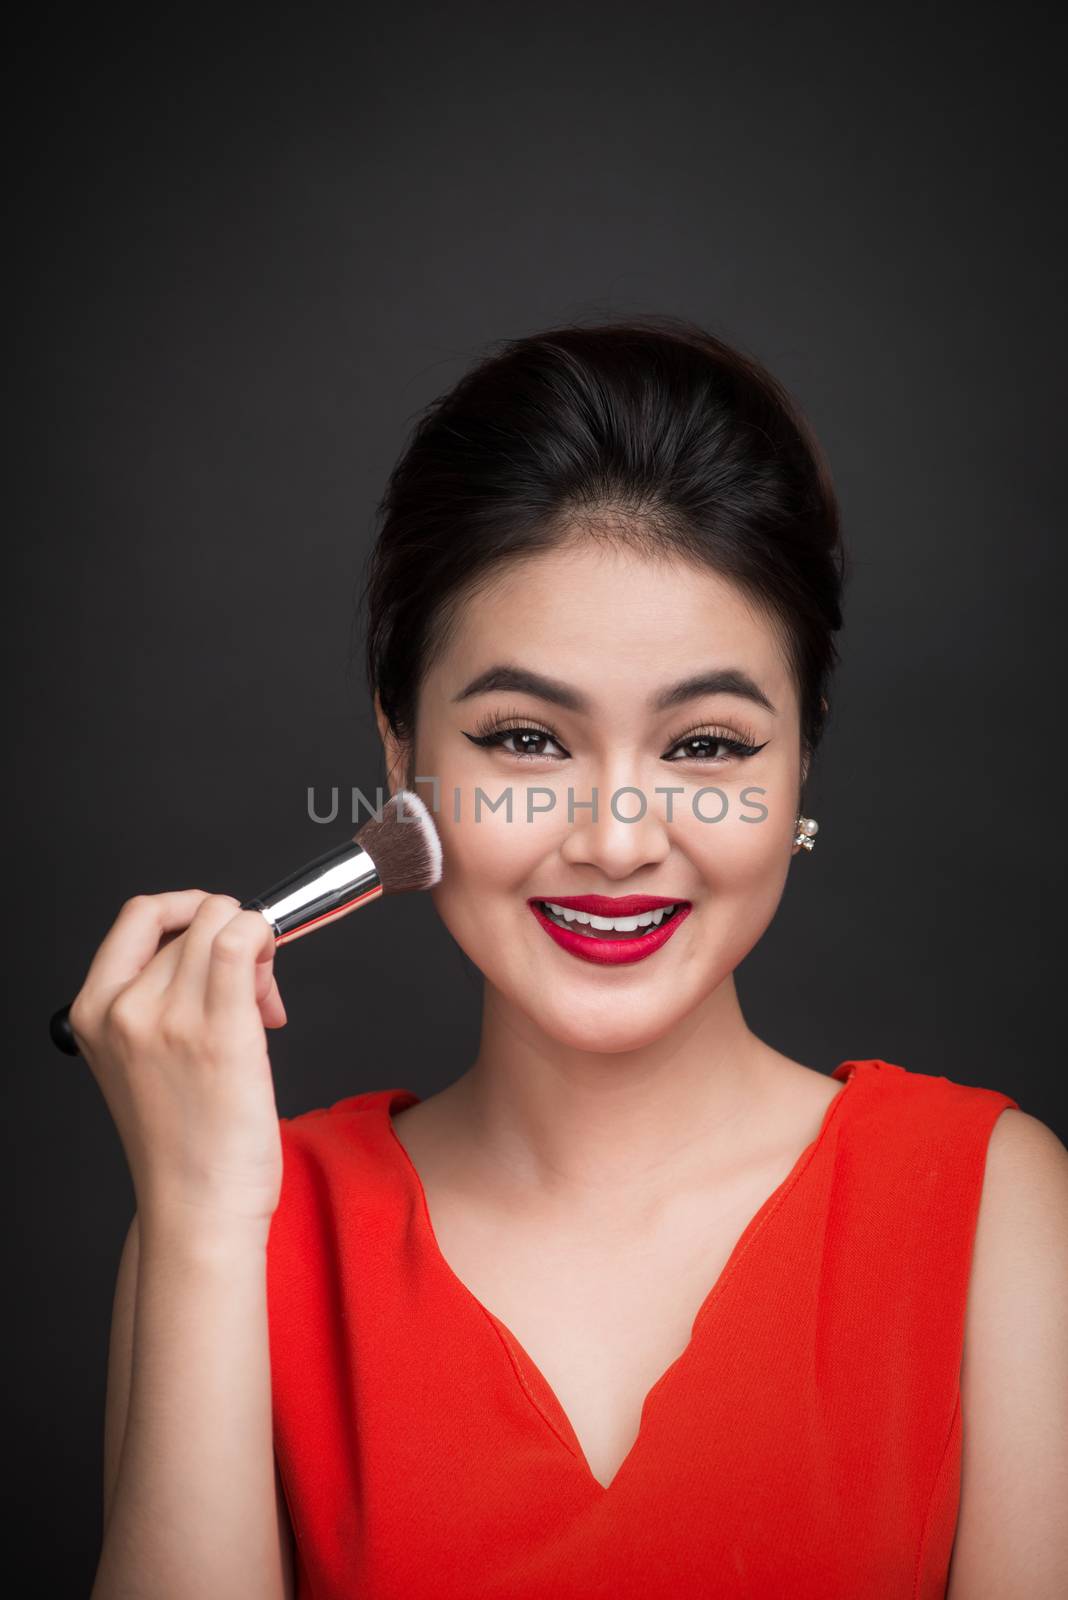 Cosmetic powder brush. Asian woman applying blusher on her cheeks with perfect make-up and red lips